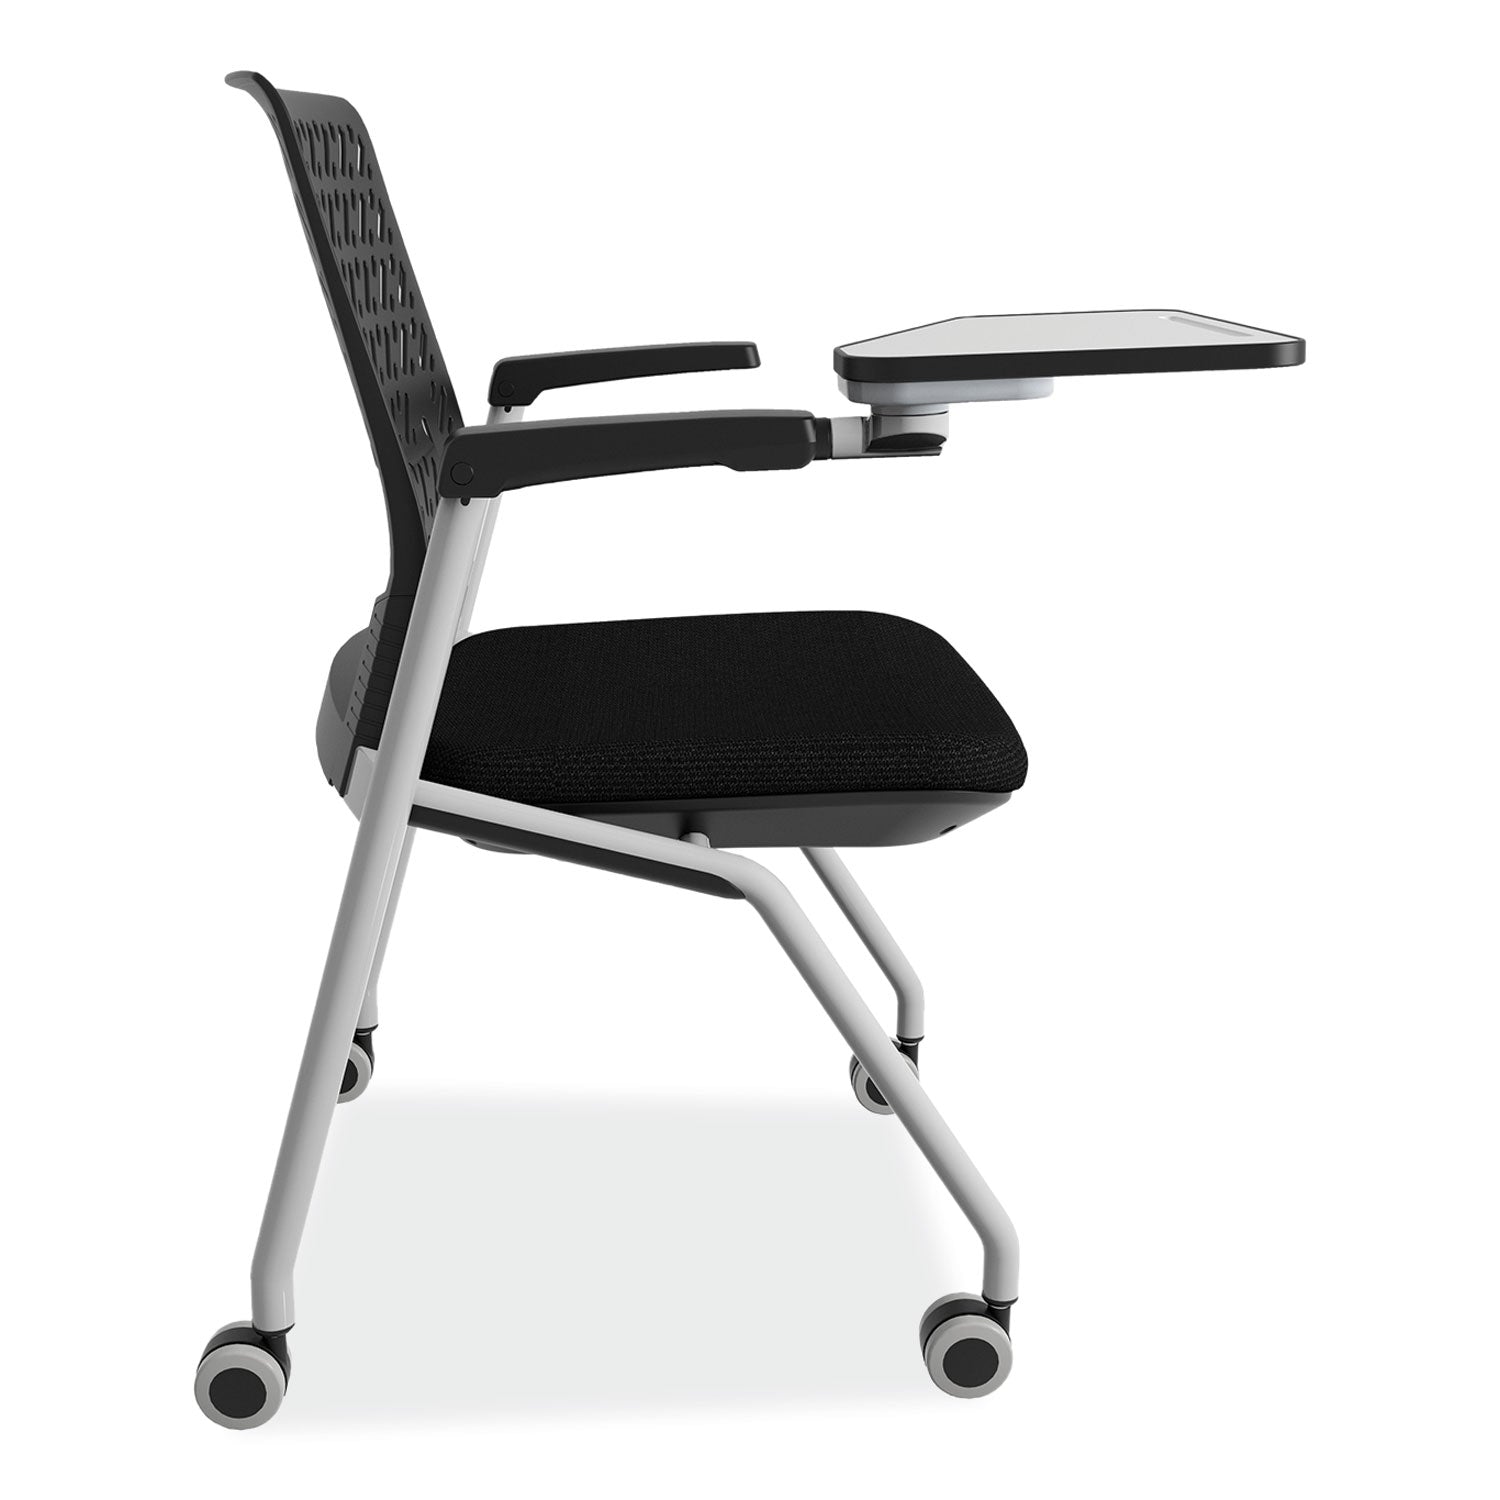 thesis-training-chair-w-flex-back-and-tablet-max-250-lb-18-high-black-seat-gray-base-2-cartonships-in-1-3-business-days_safktx3sbblk - 2